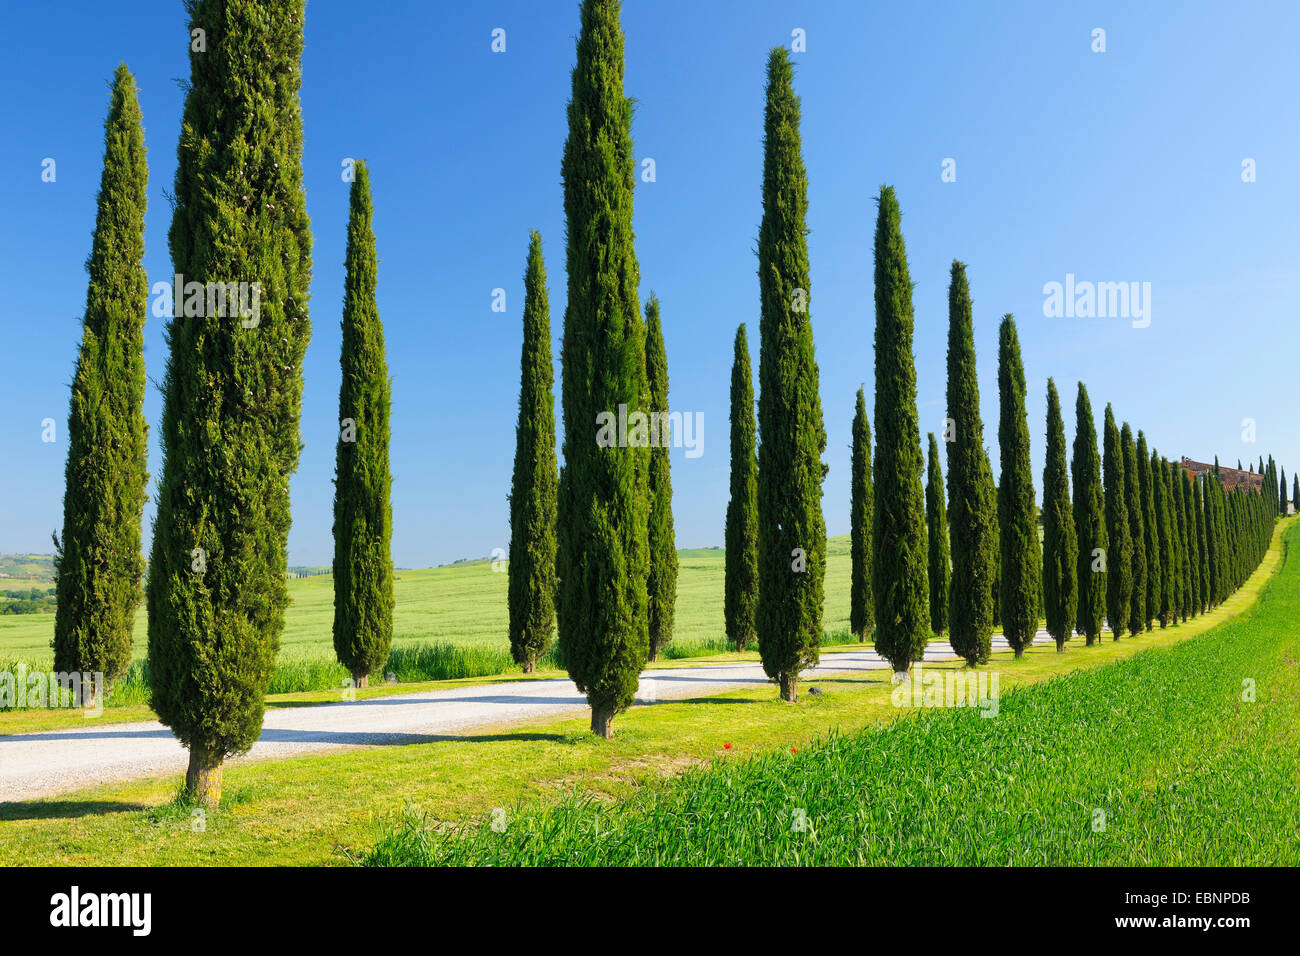 Italian cypress (Cupressus sempervirens), Cypress Trees Avenue in Spring, San Quirico d' Orcia, Val d' Orcia, Italy, Tuscany Stock Photo